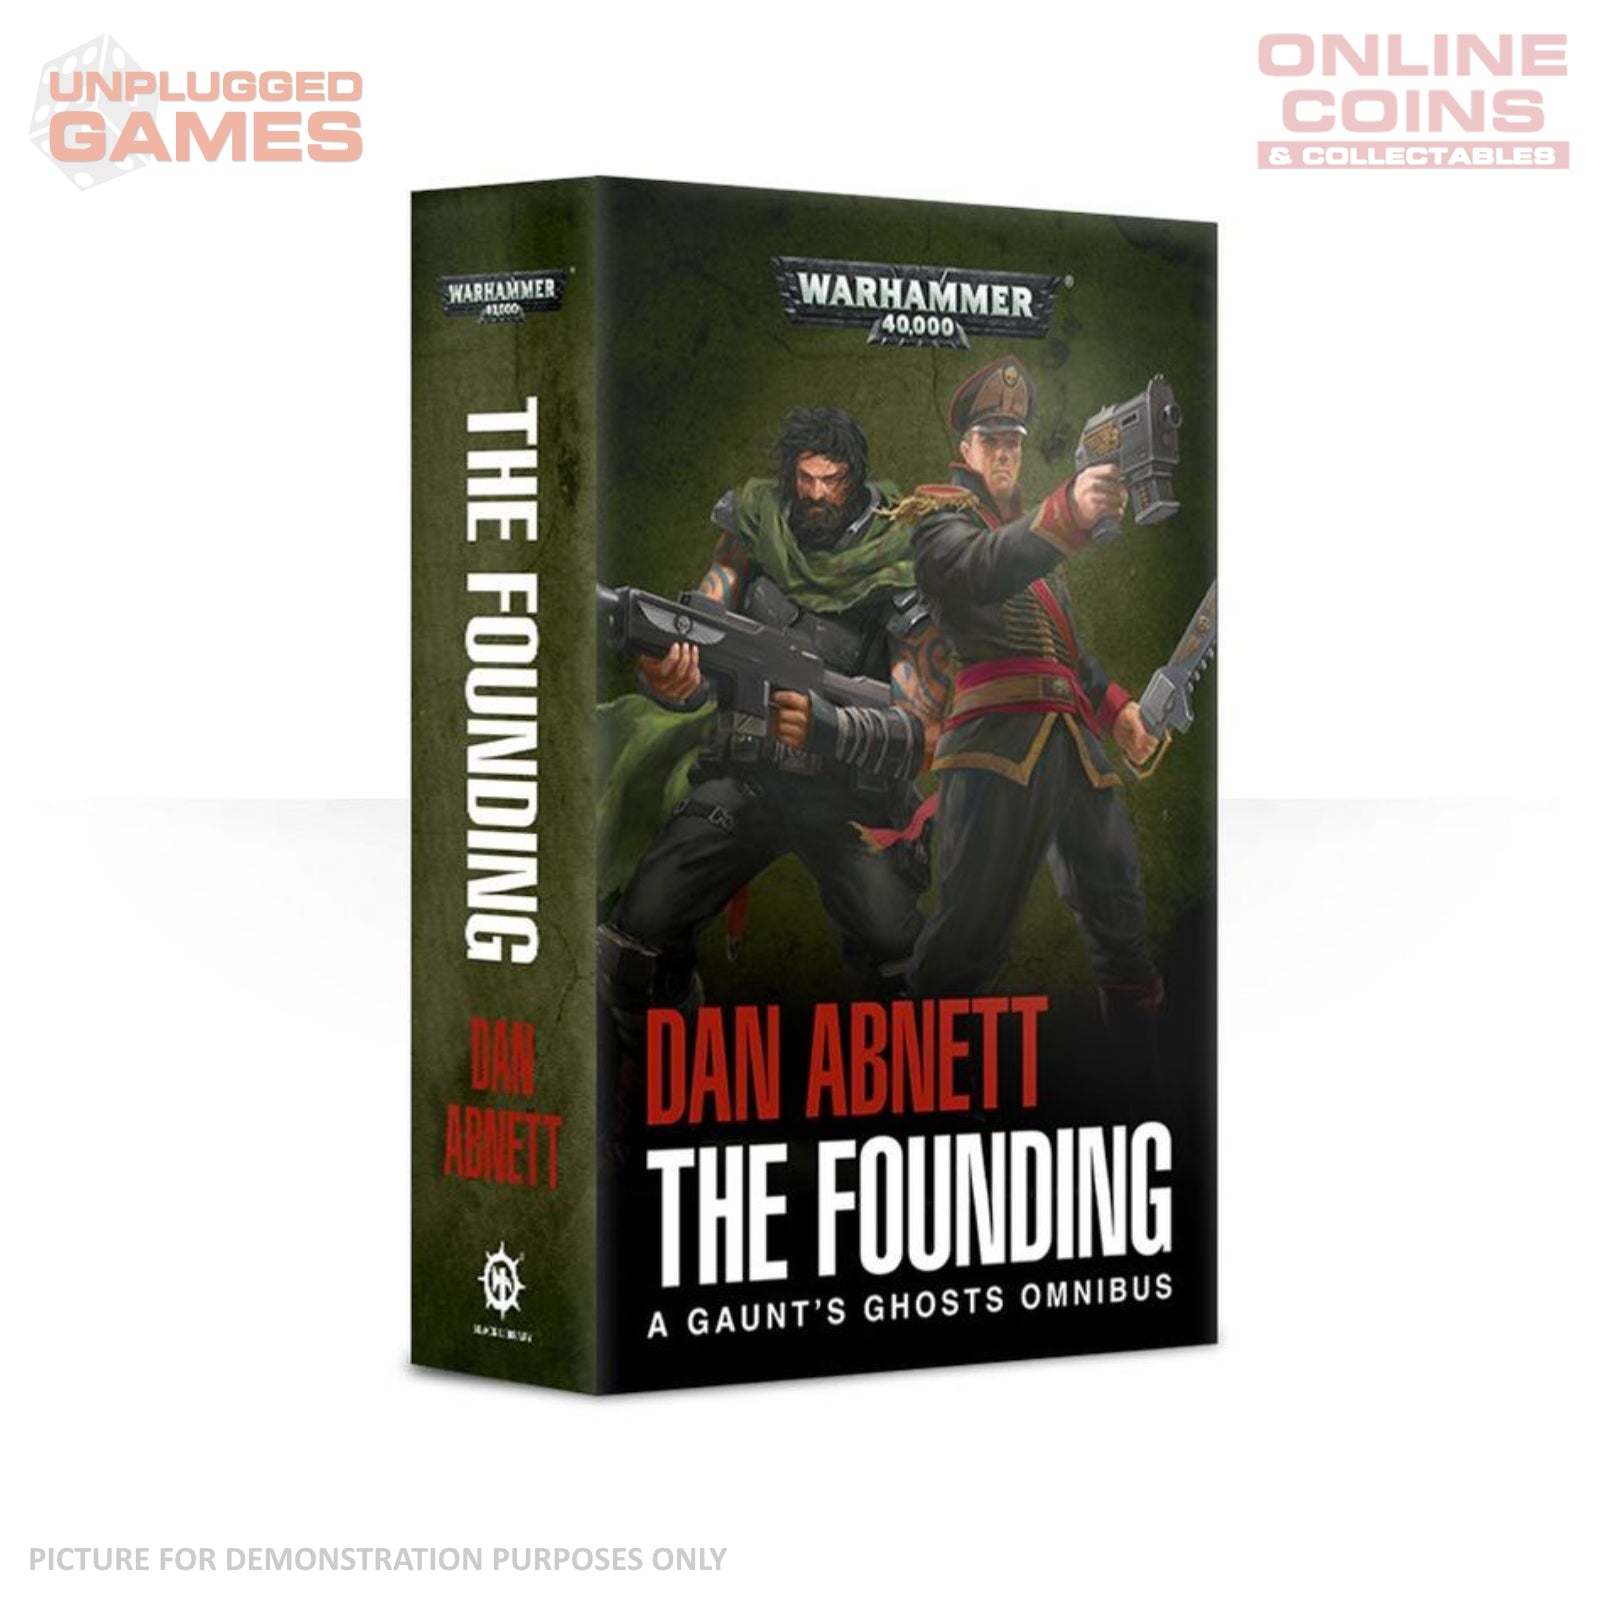 Warhammer 40,000 - The Founding A Gaunt's Ghosts Omnibus